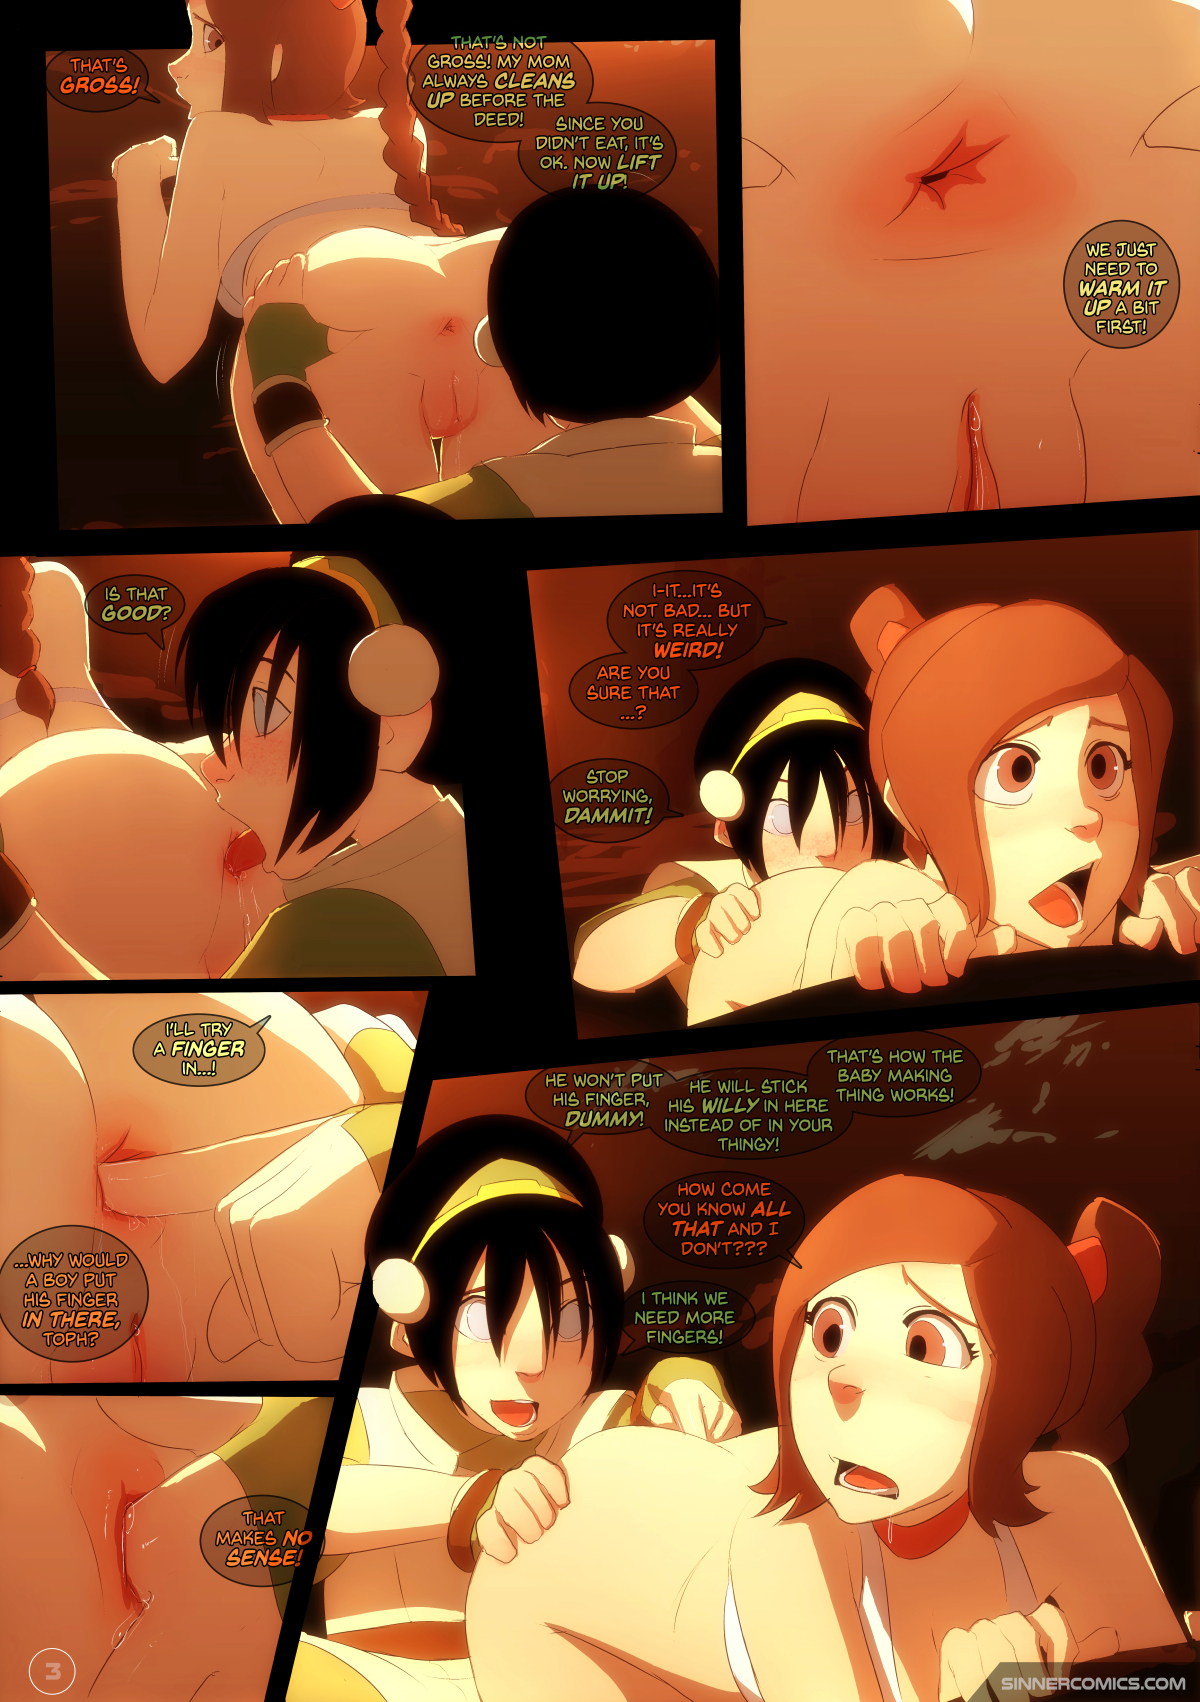 UPDATED NEW SILLYGIRL TOPH VS TY LEE AVATAR THE LAST AIRBENDER PARODY